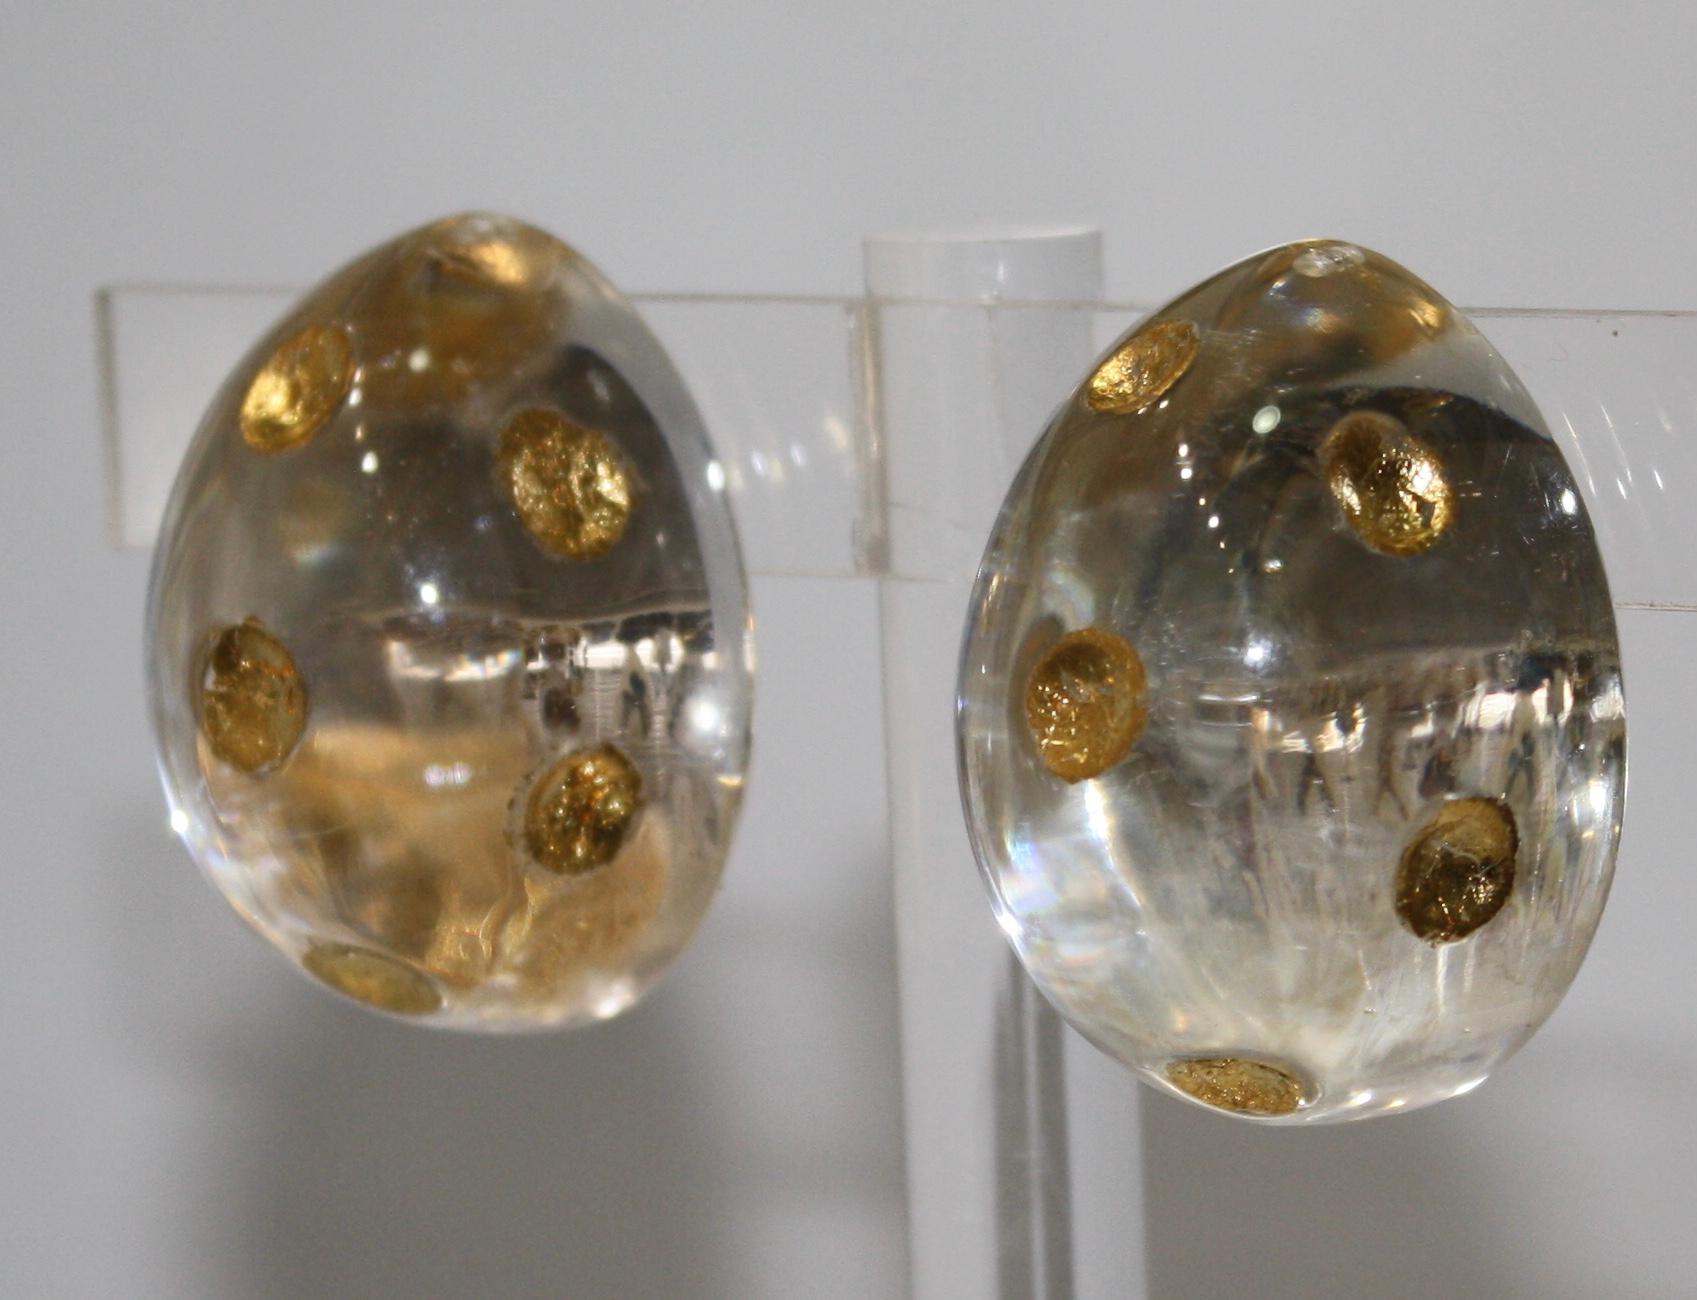 Lucite half ball with 24Kt gold dots and sterling silver back clip earrings. The silver gives a bright reflection of light on your ears. Limited series.
Signature on the back of the earrings